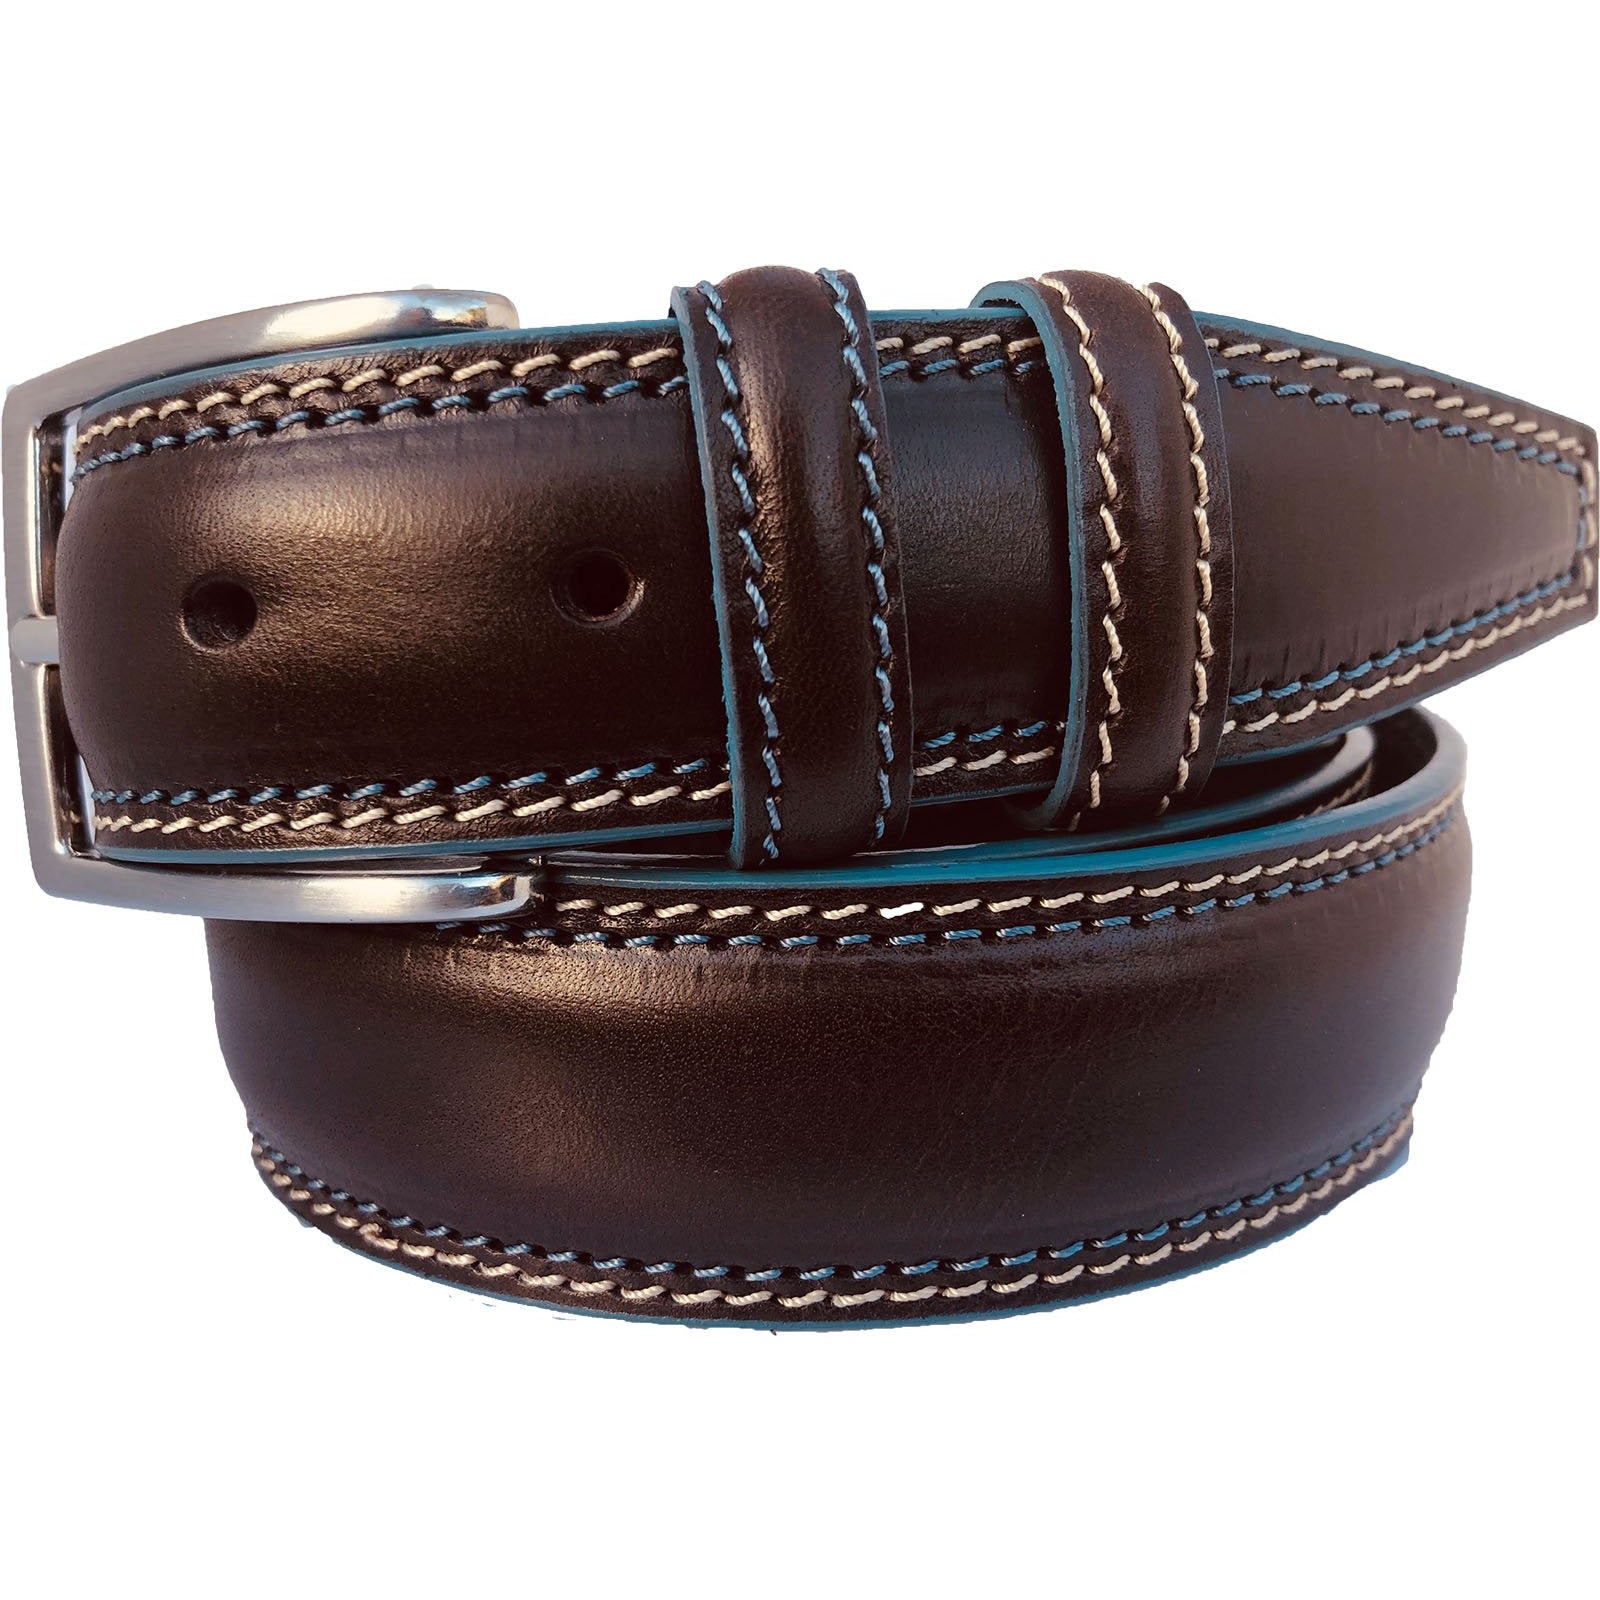 BROWN WITH BLUE CONTRAST STITCH & EDGE 35MM LEATHER BELT